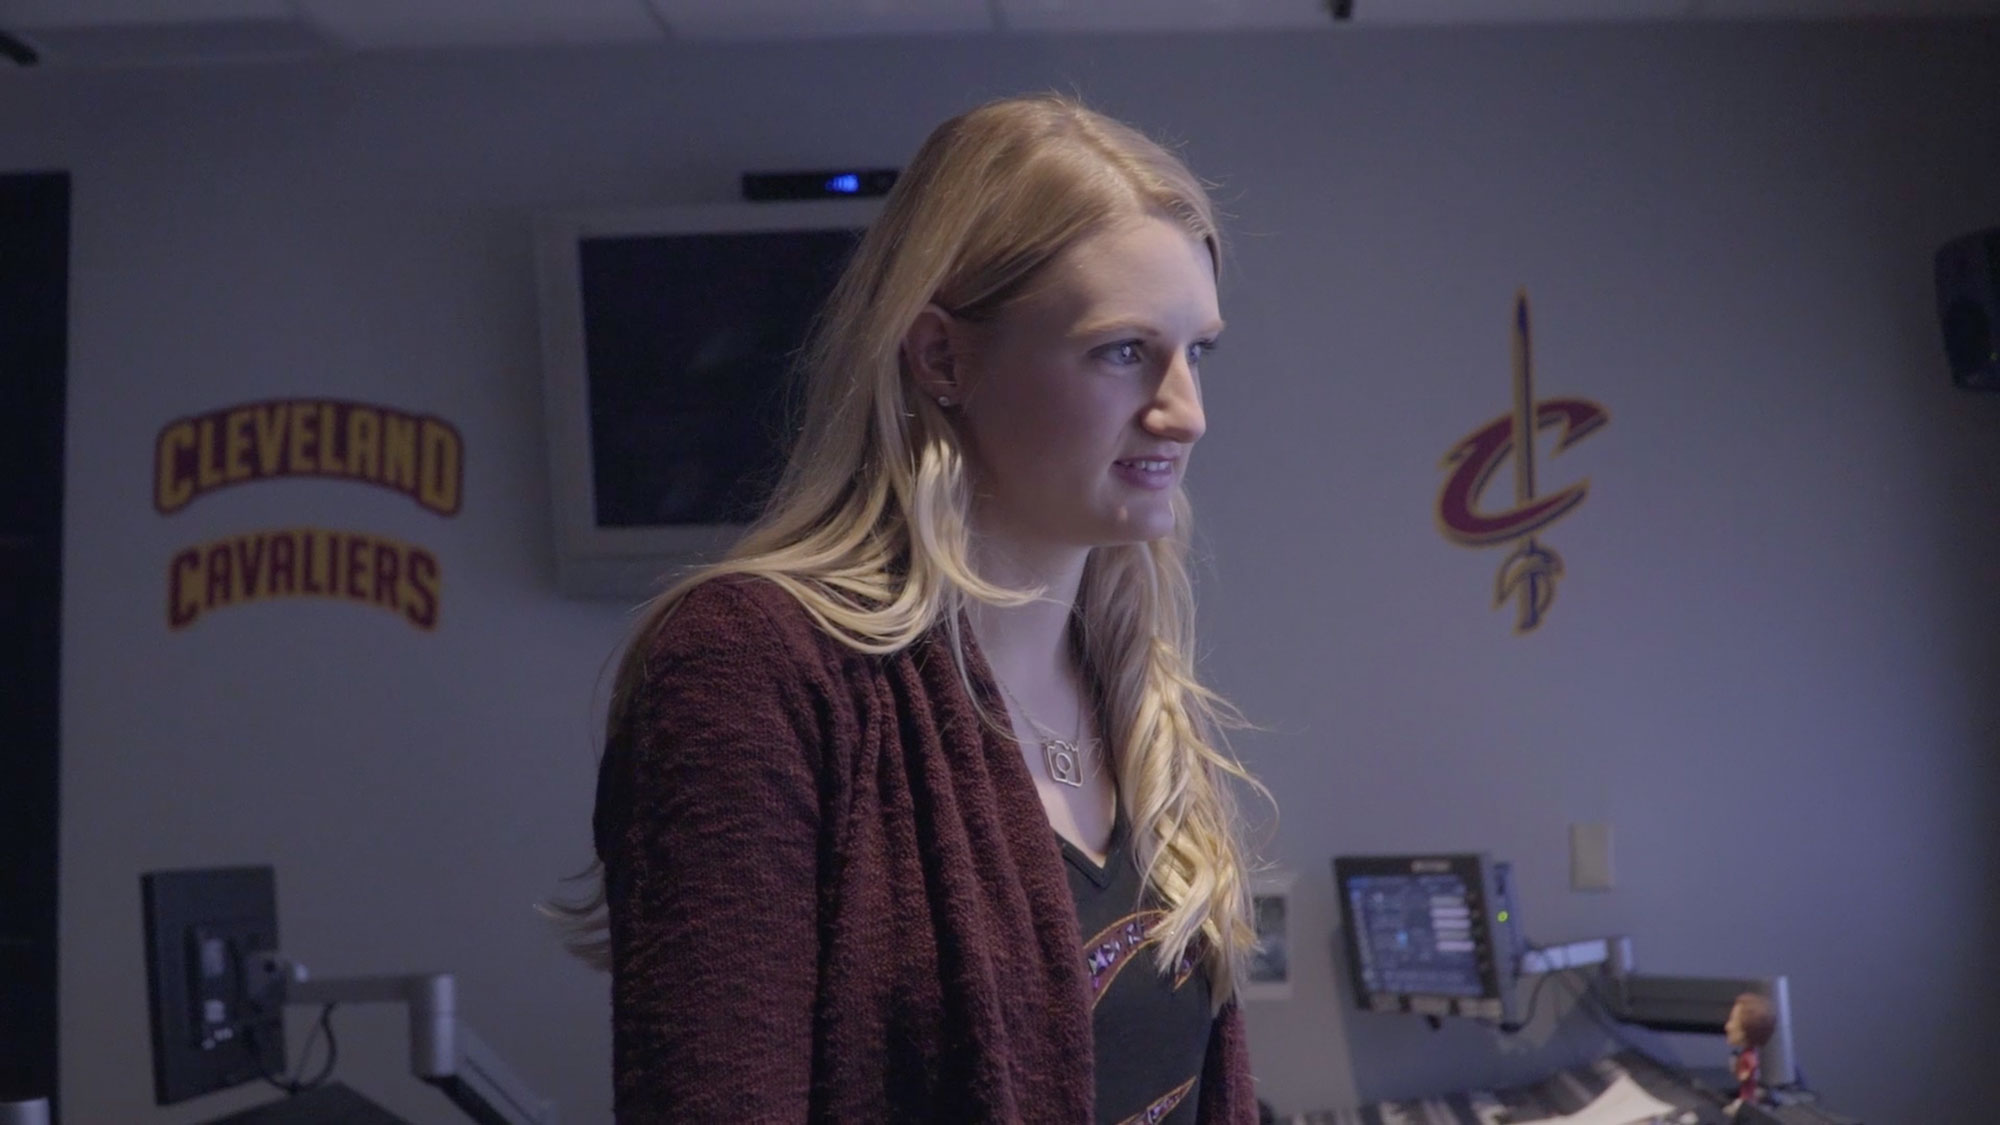 Watch Alison Cole, former Interactive Media student, share her story